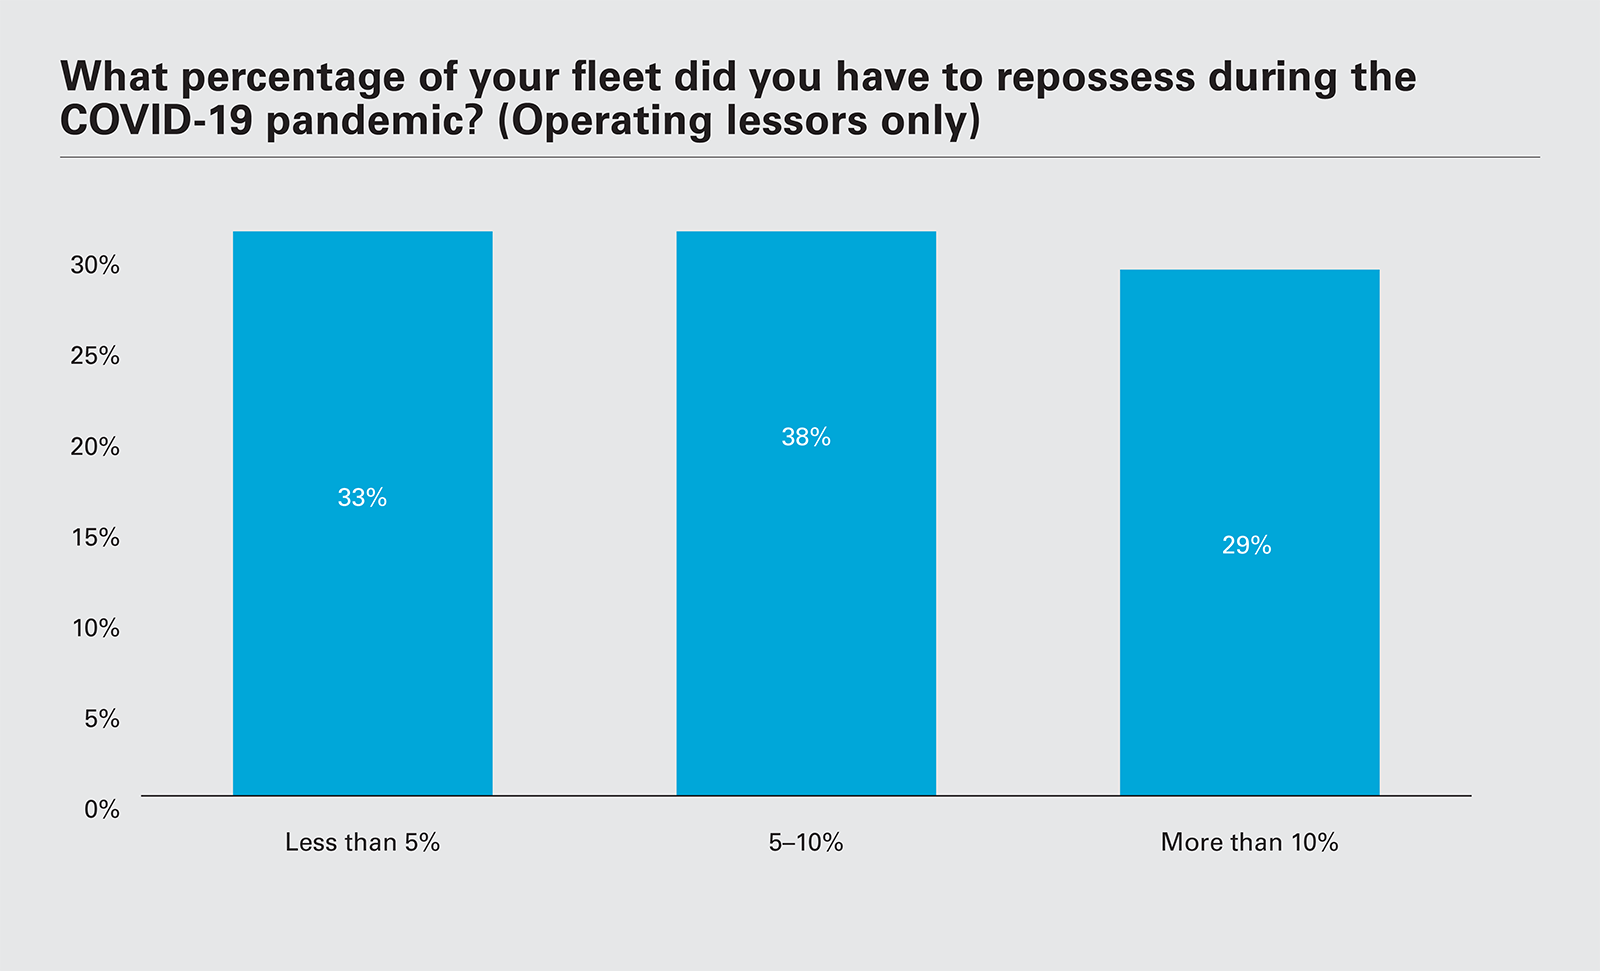 What percentage of your fleet did you have to repossess during the COVID-19 pandemic? (Operating lessors only)